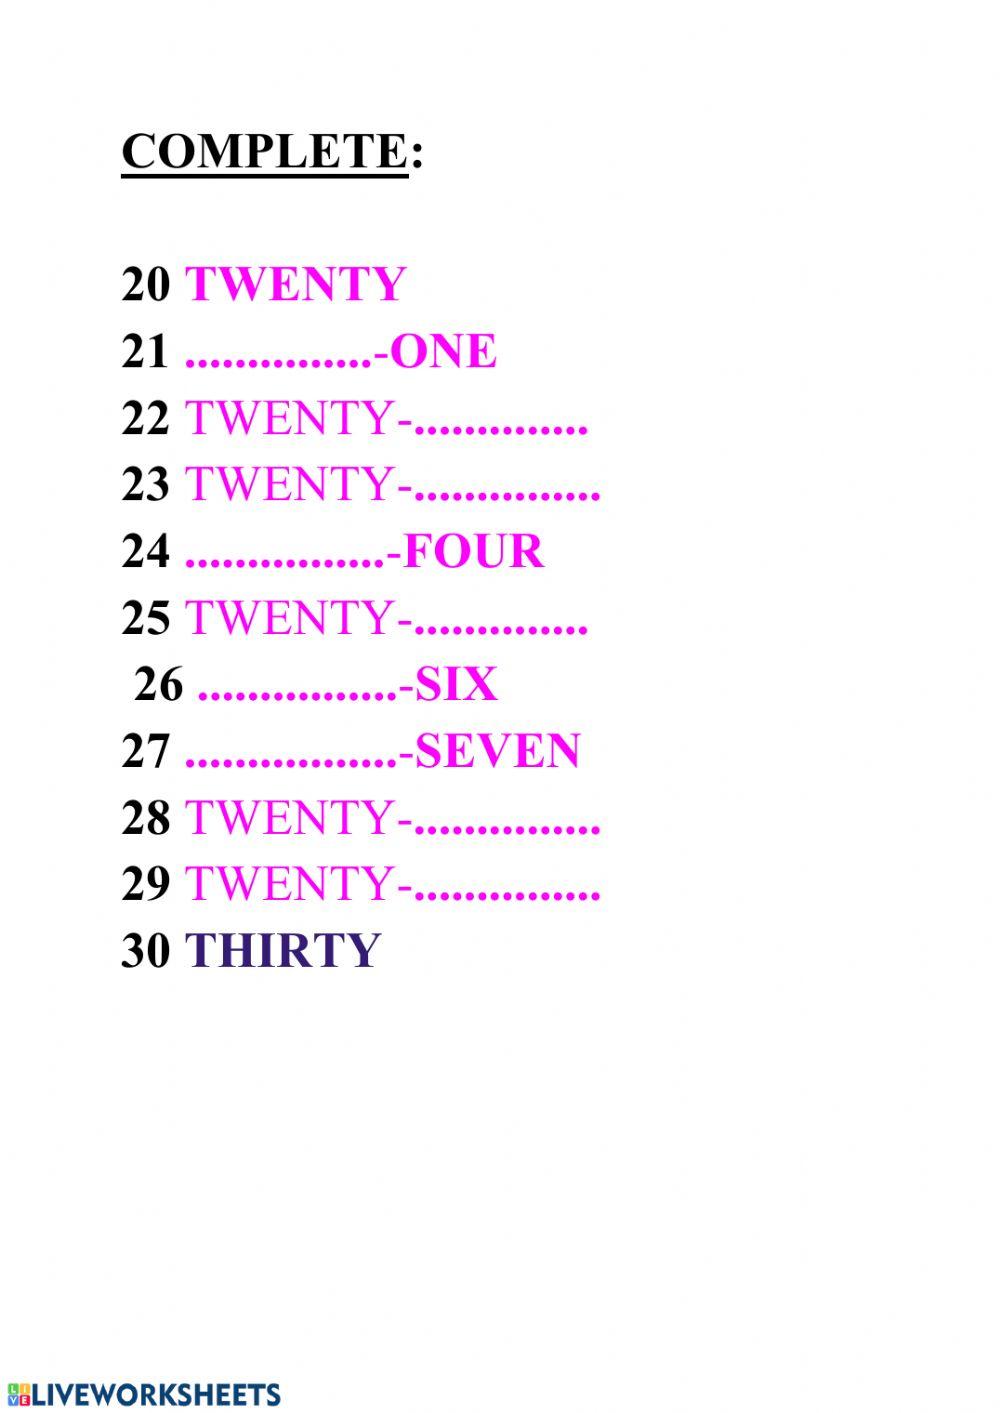 Numbers from 20 to 30